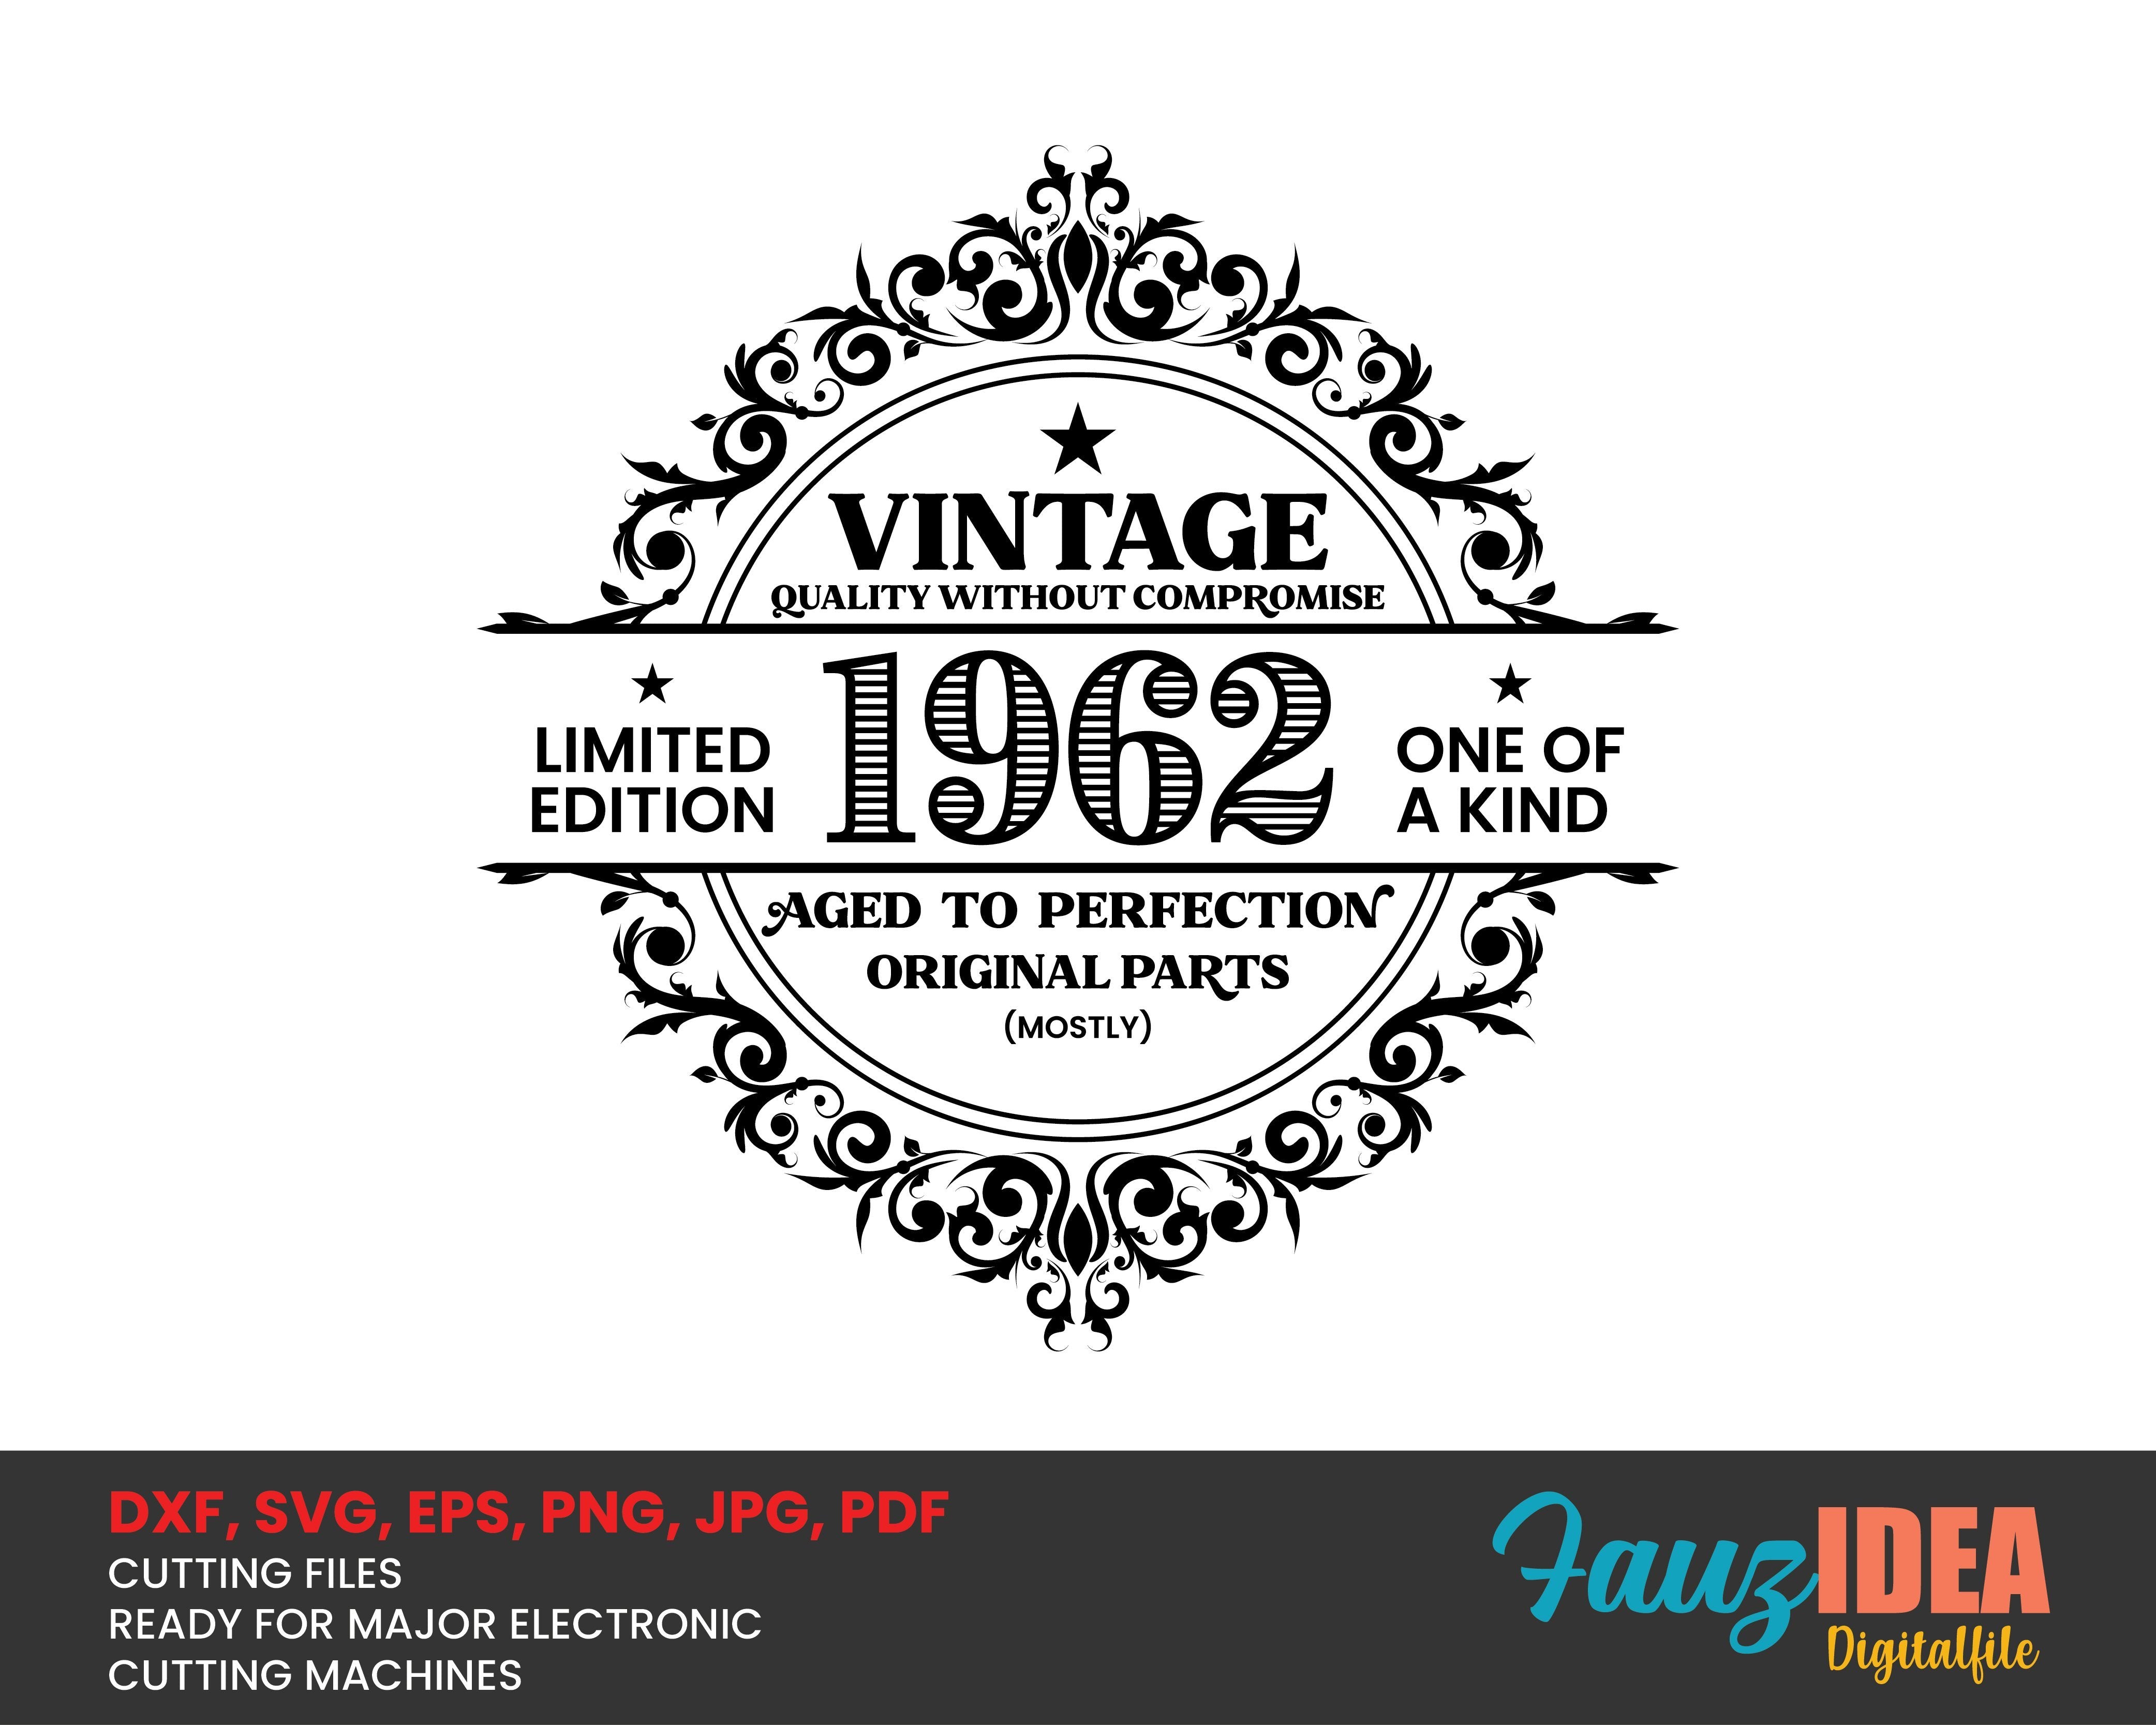 Download Vintage 1962 Svg Birthday Vintage 1962 Svg Clipart Aged To Perfect So Fontsy